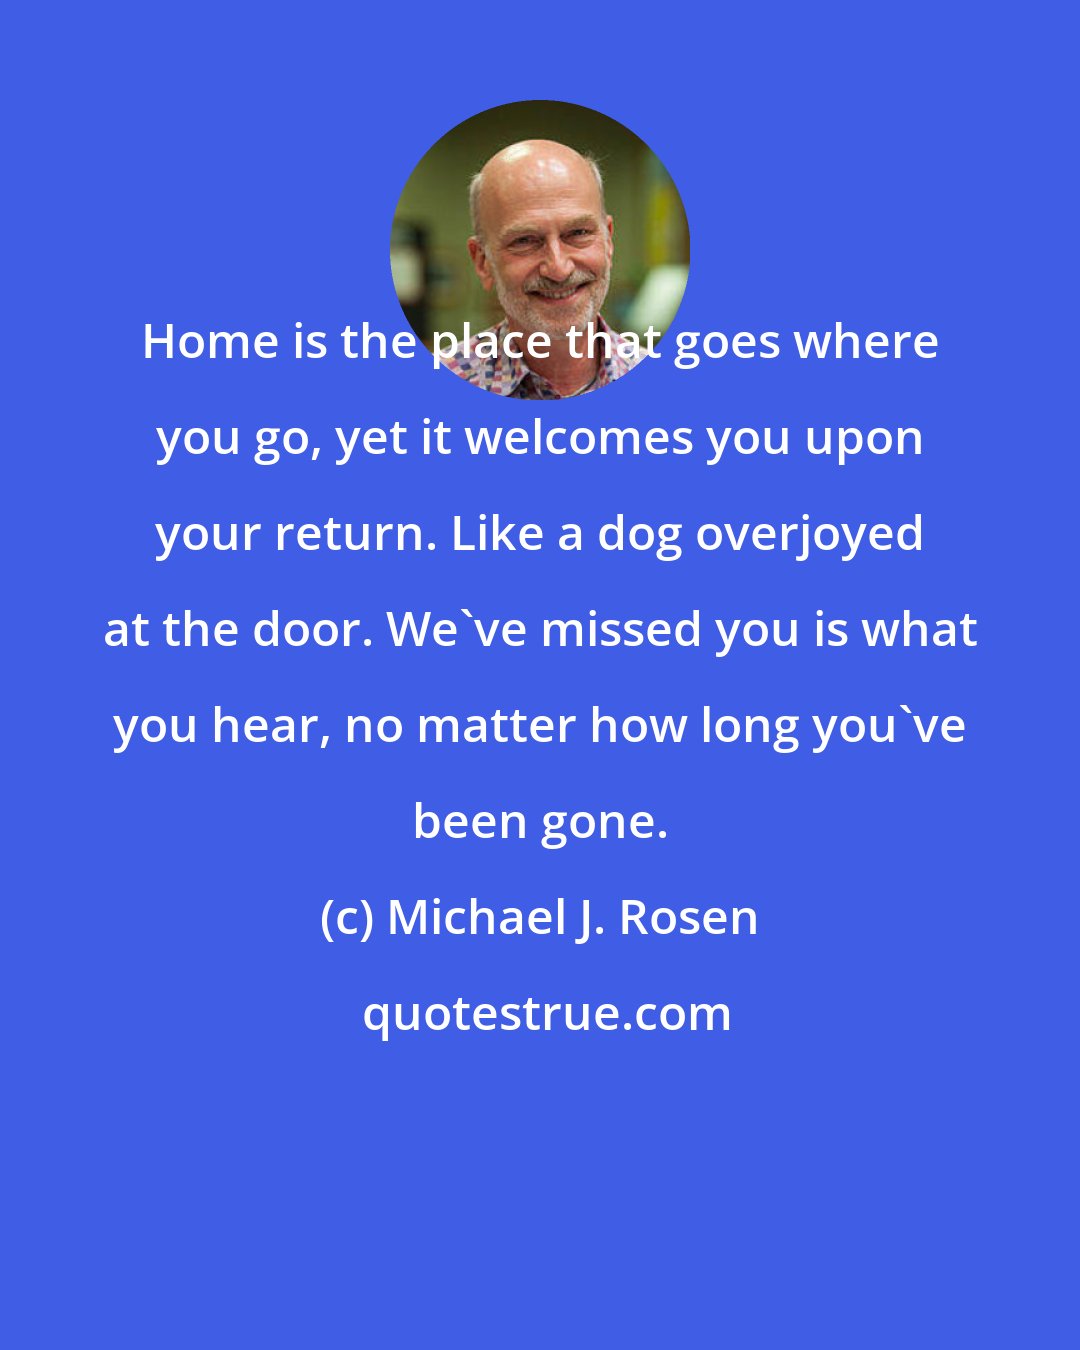 Michael J. Rosen: Home is the place that goes where you go, yet it welcomes you upon your return. Like a dog overjoyed at the door. We've missed you is what you hear, no matter how long you've been gone.